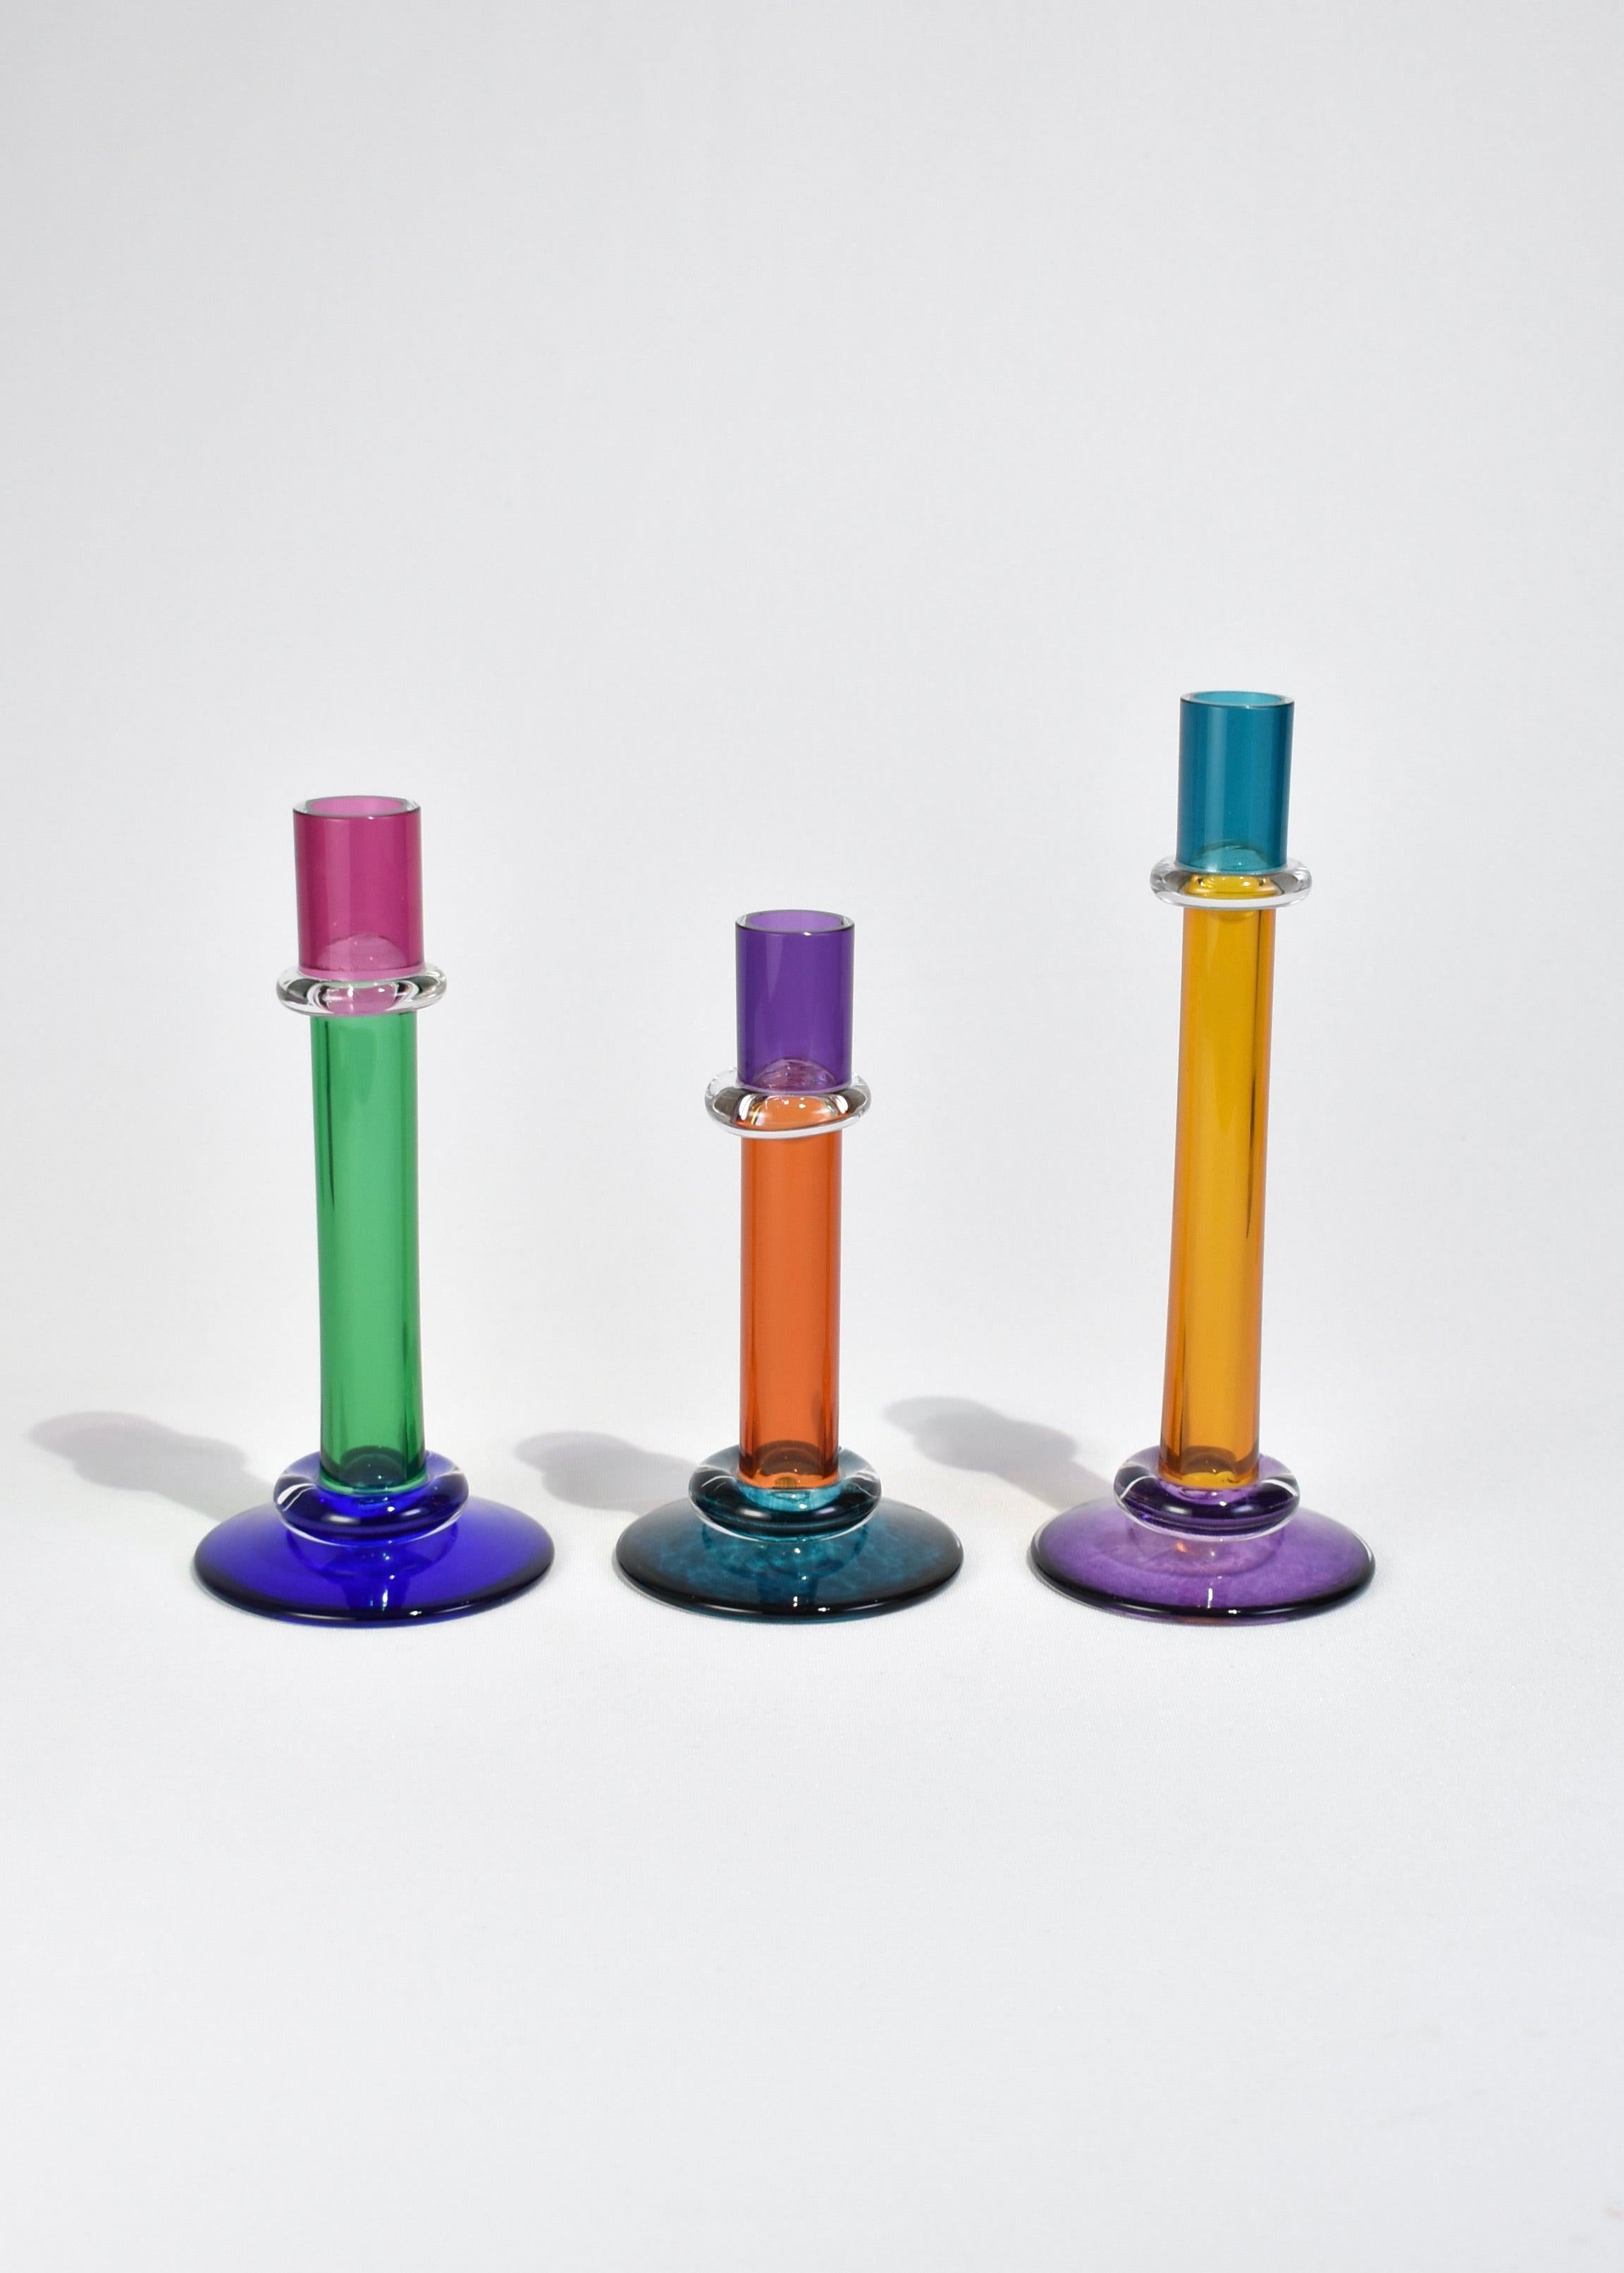 Colorful blown glass candleholder set of three with 1 inch (2.54 cm) diameter opening. Signed Chatham Glass Company, 1999.

Dimensions:
9.25 in (23.49 cm) tall, 3.5 in (8.89 cm) wide
8 in (20.32 cm) tall, 3.75 in (9.52 cm) wide
7 in (17.78 cm)